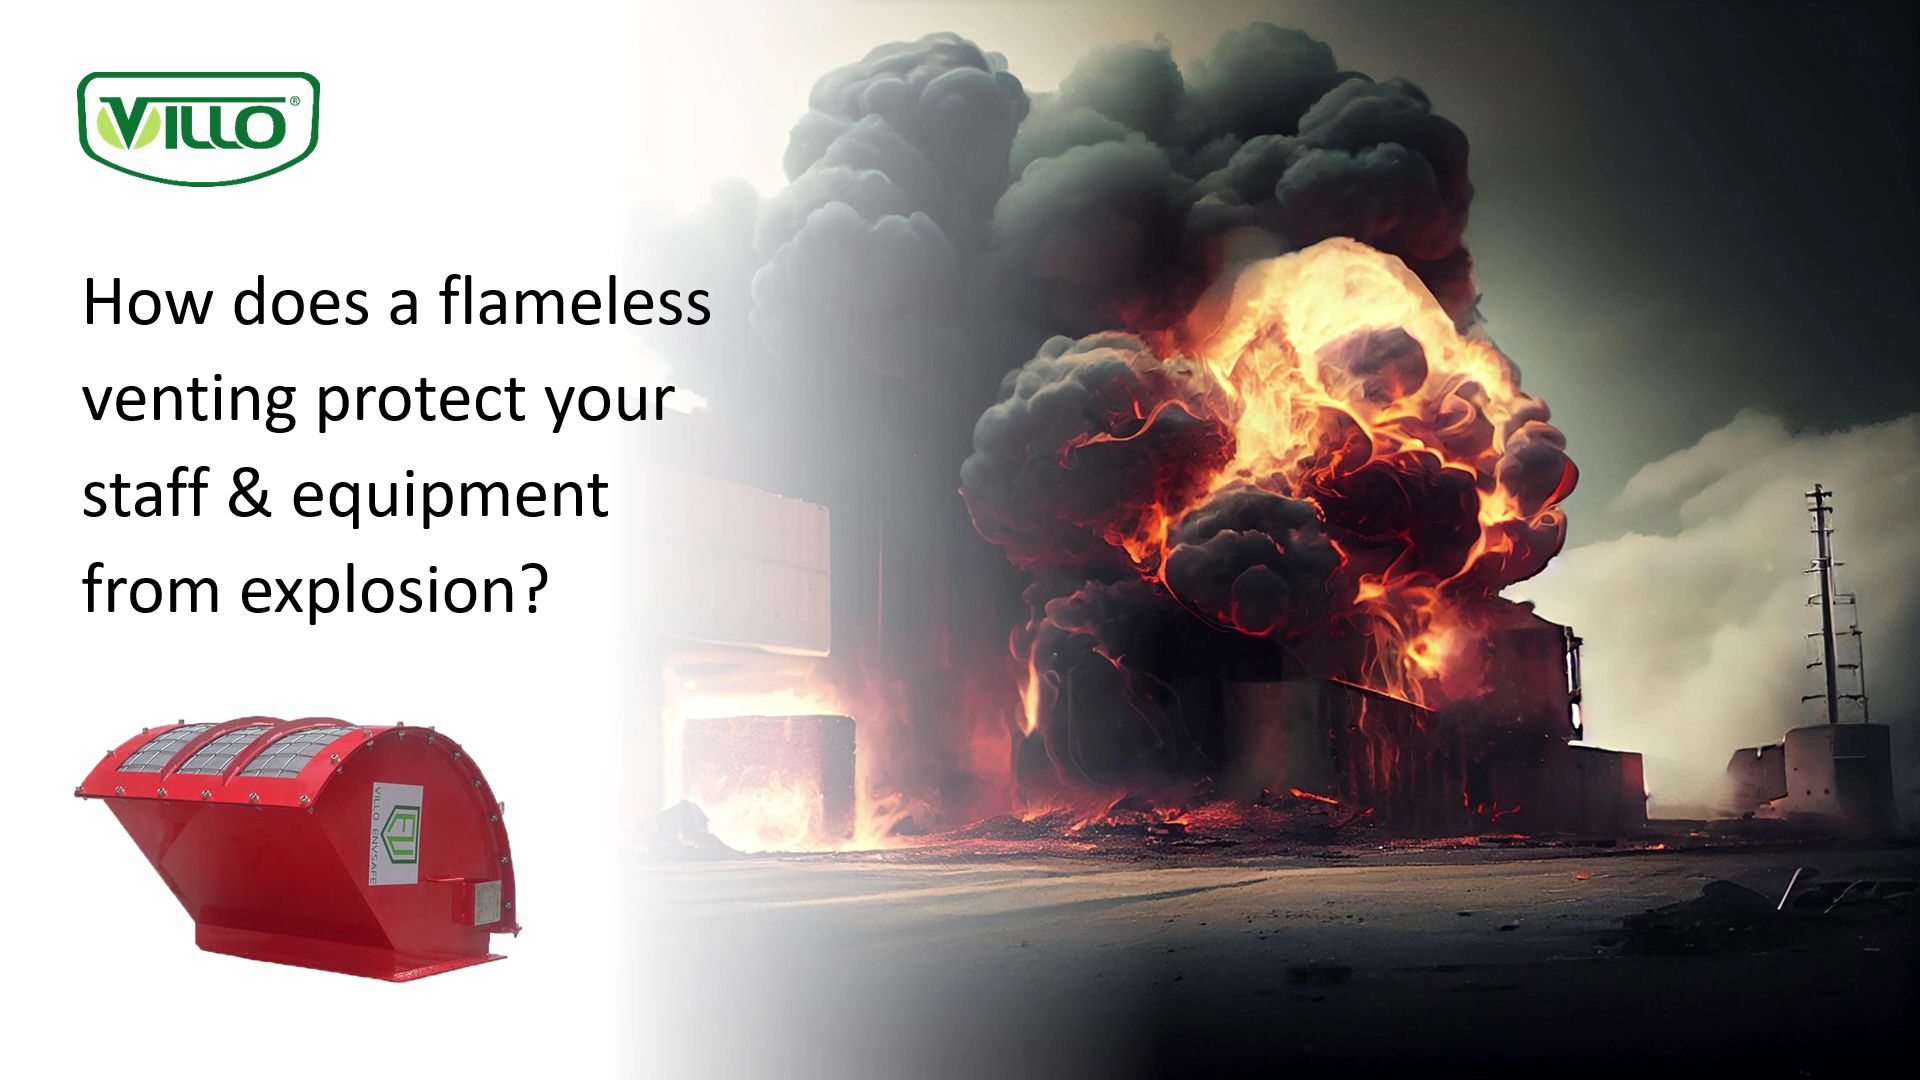 How does a flameless venting protect your staff & equipment from explosion?